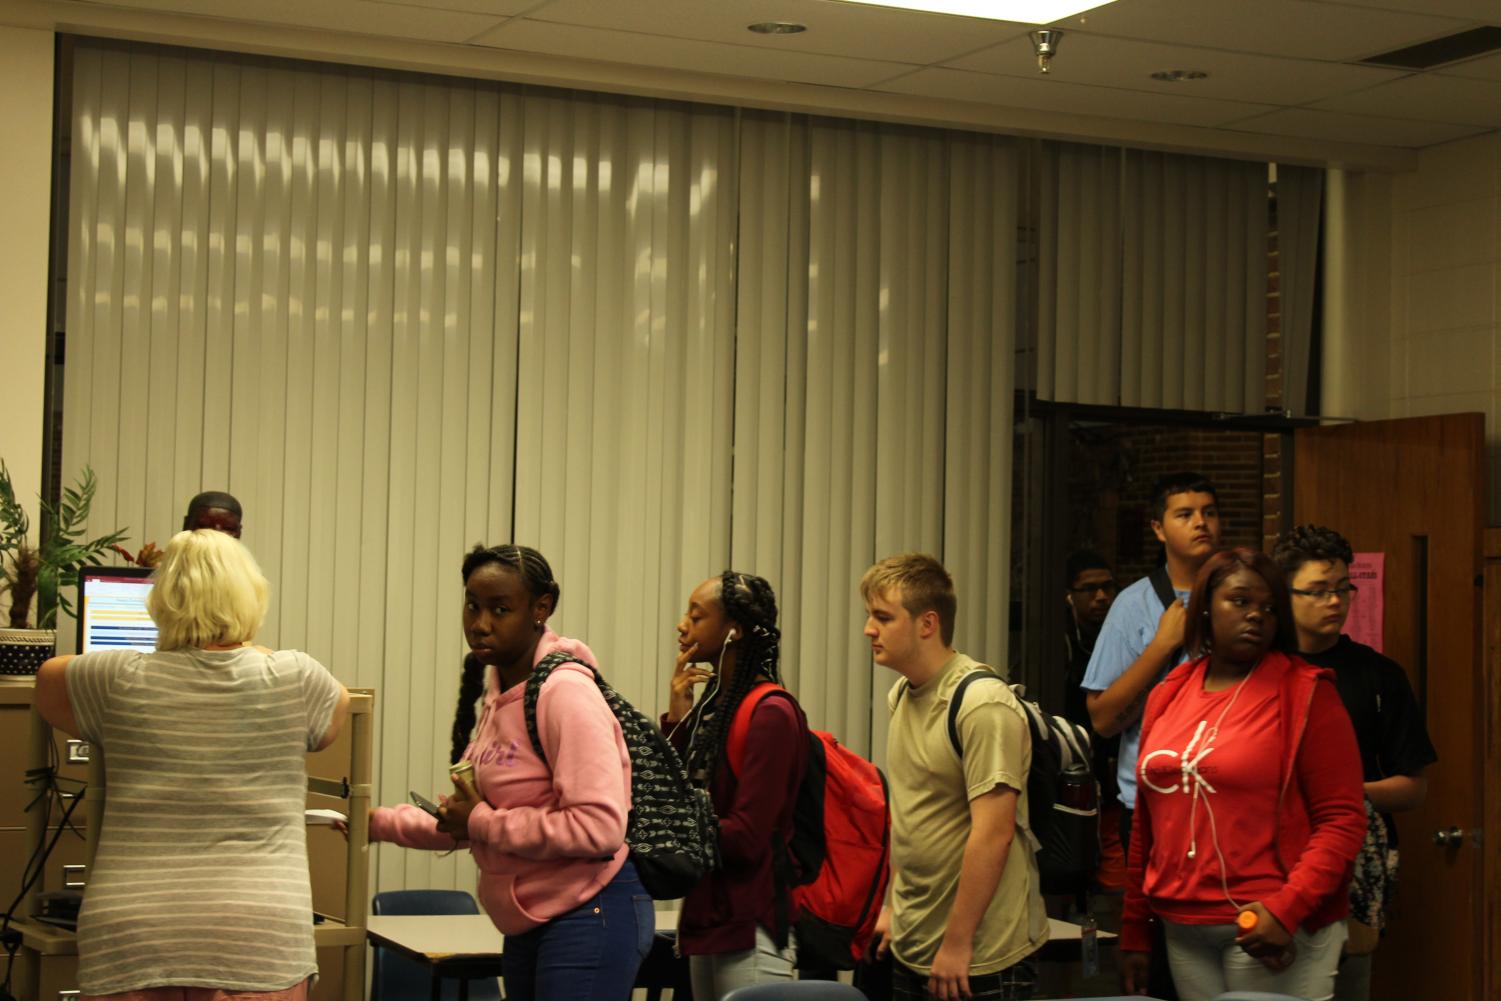 Students wait in line to get a tardy pass to their A1 class.
Photo by Nadia Spurlock